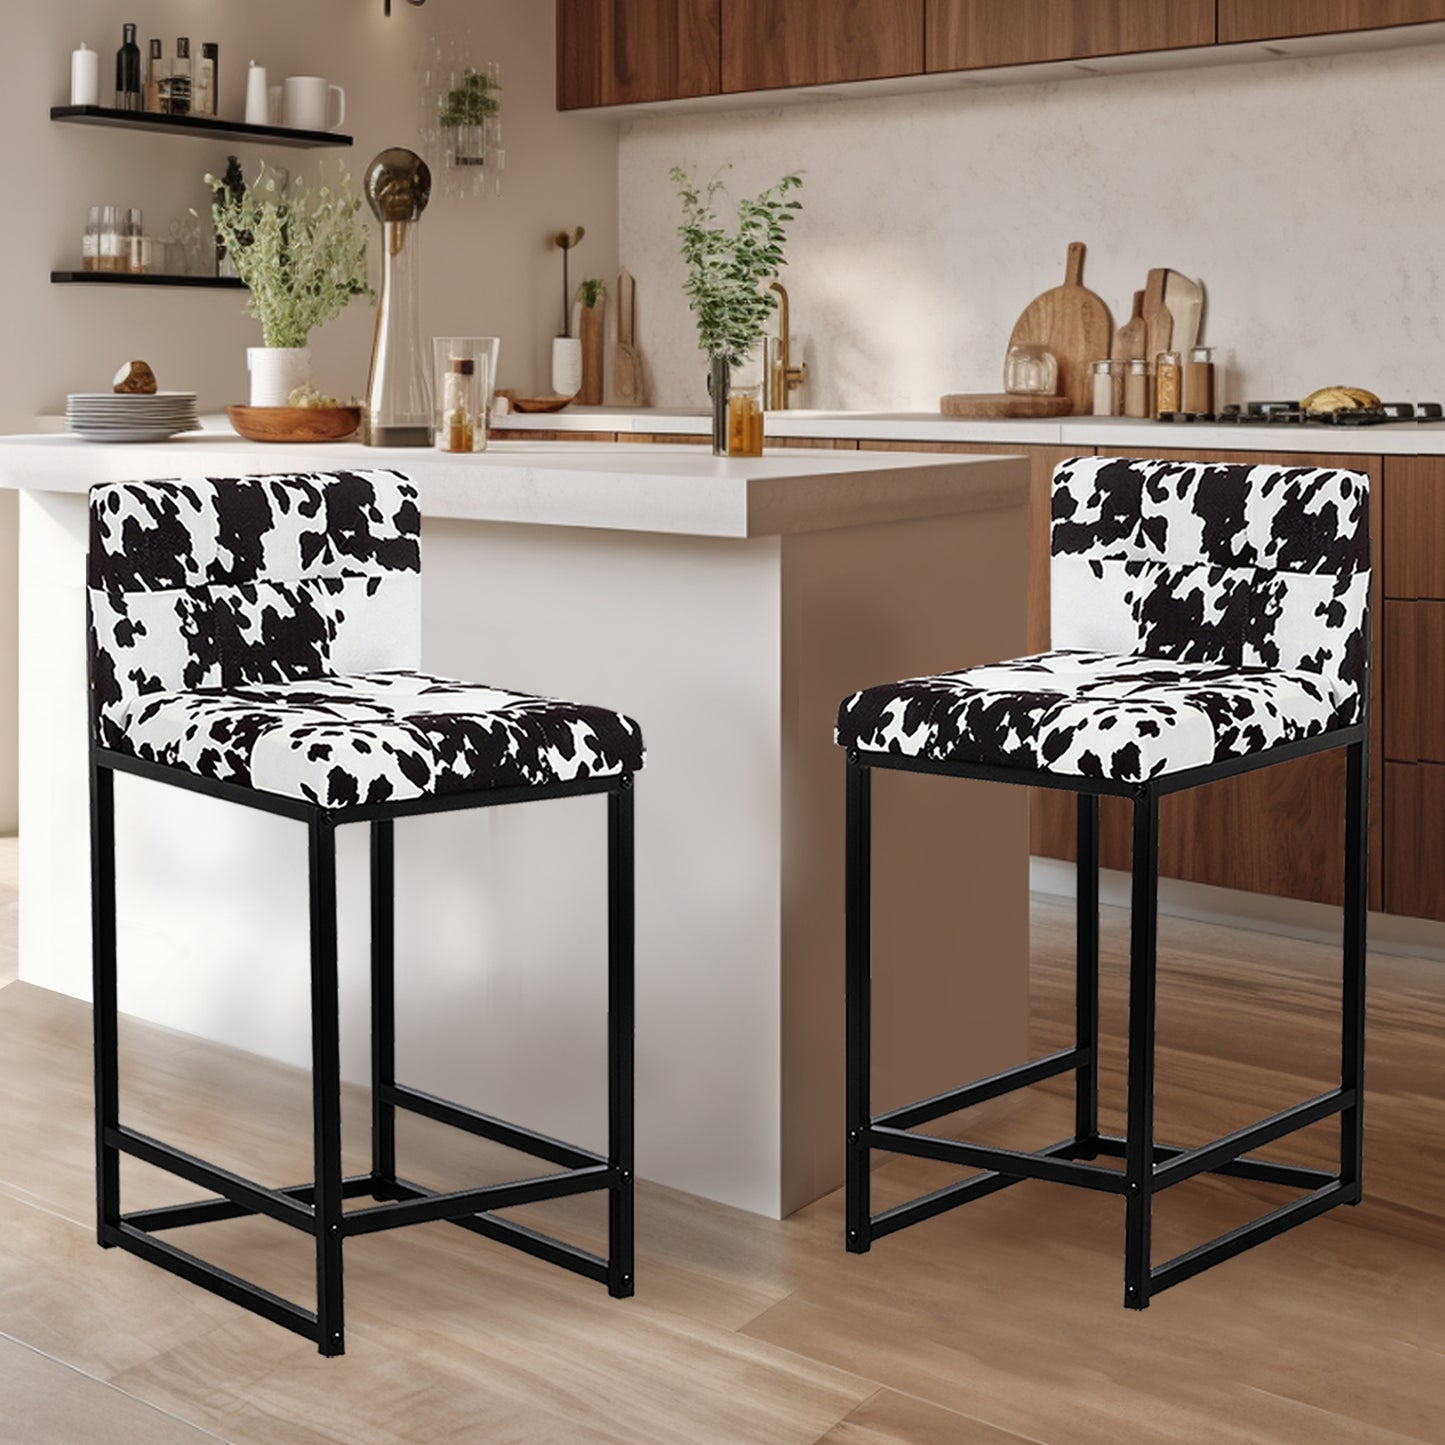 Stainless Steel Upholstered Fabric Counter Stool,Blackcow